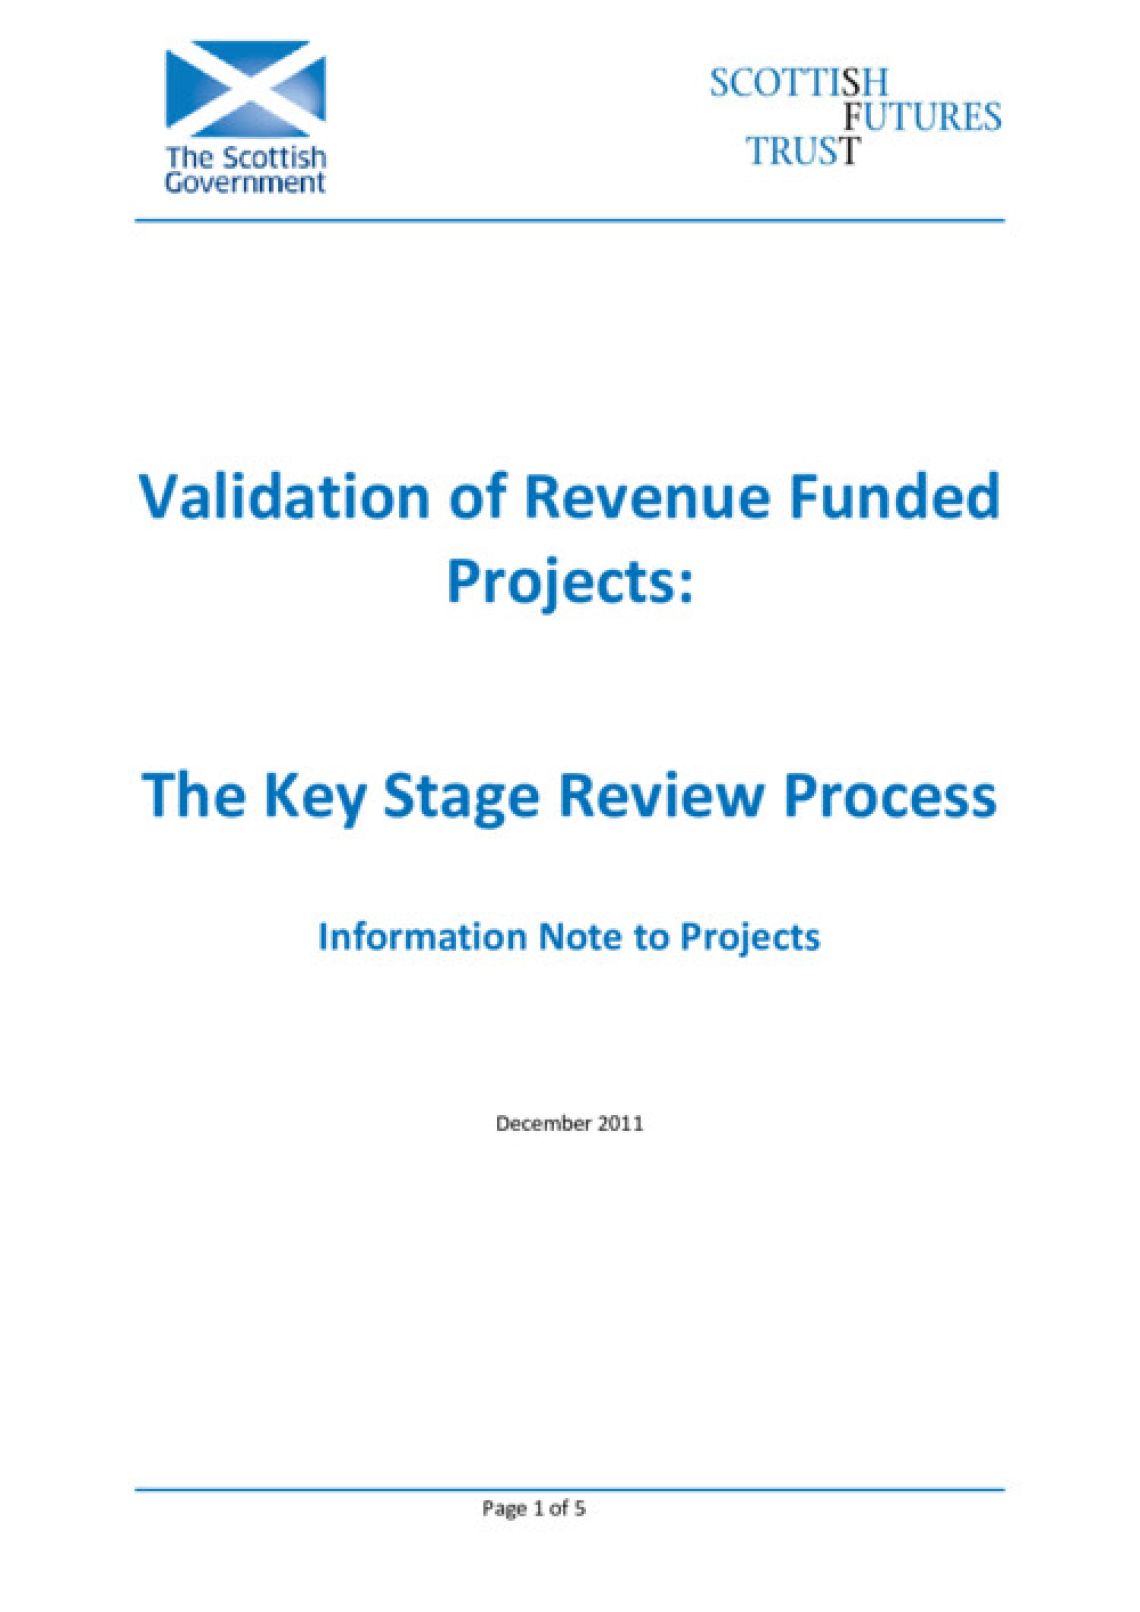 Key Stage Review Process - Information Note cover